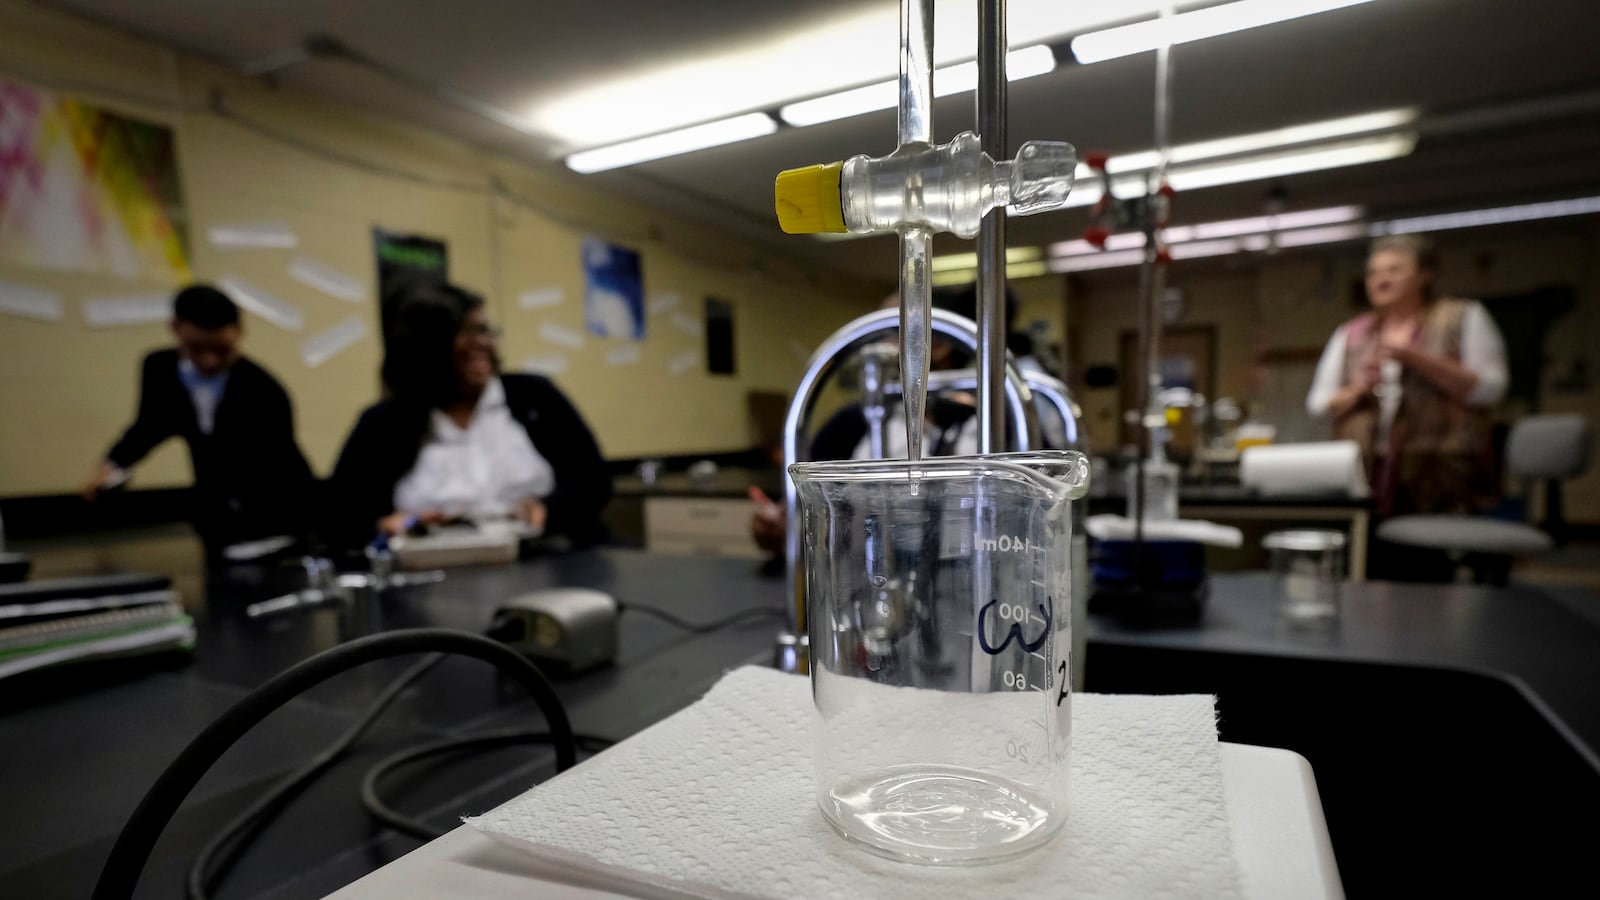 Students sit in the background of a science experiment in a school laboratory.